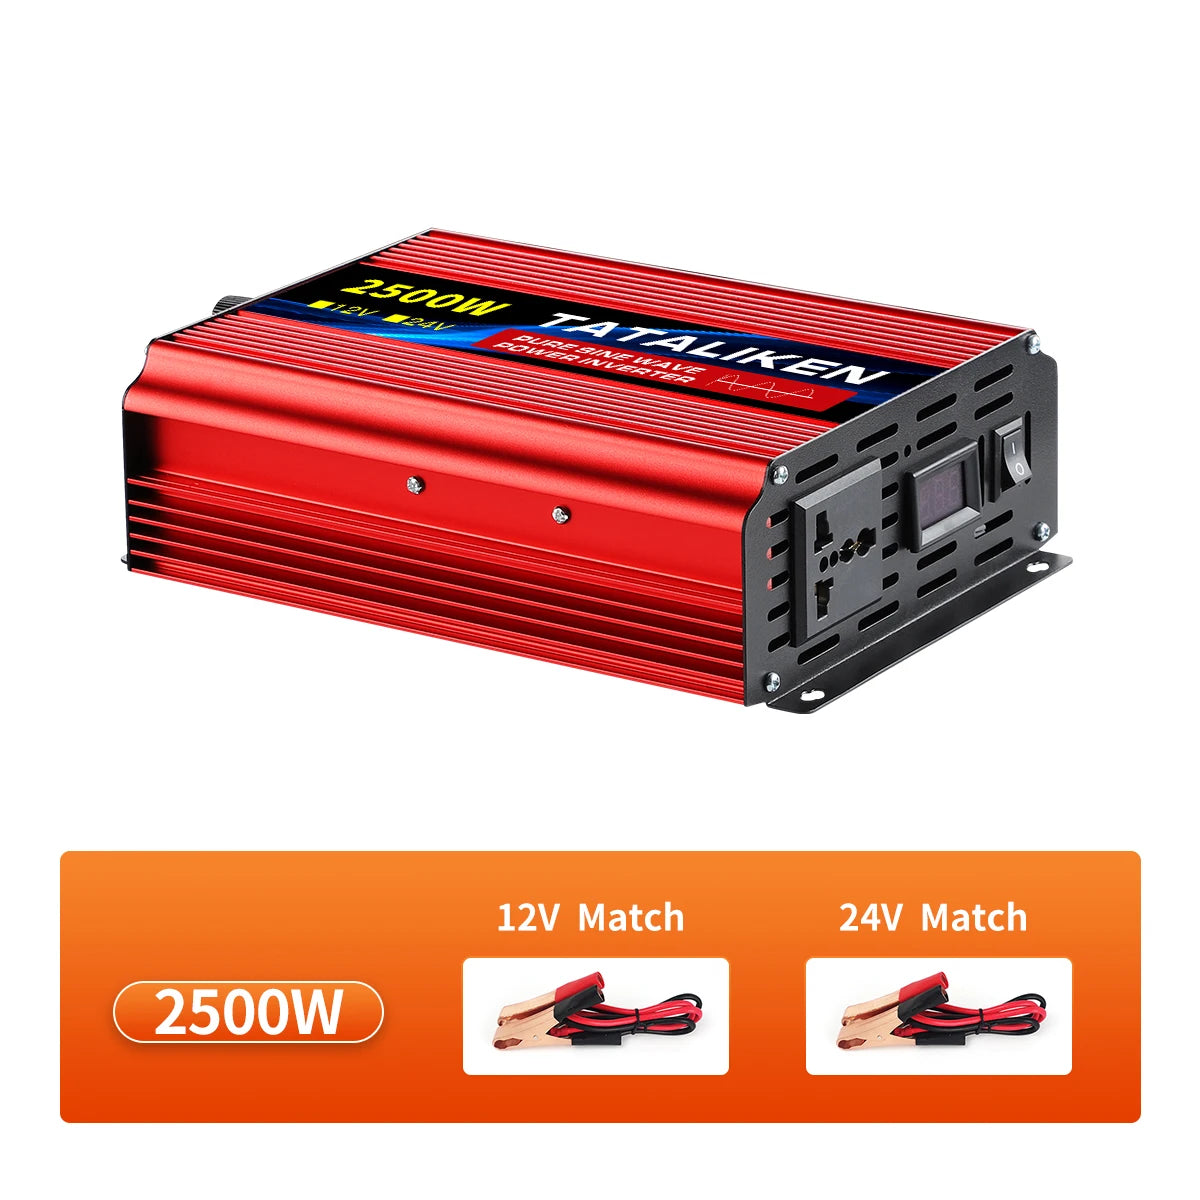 pure sine wave inverter, Universal power converter with 1500W output, AC 220V, and 50Hz frequency.